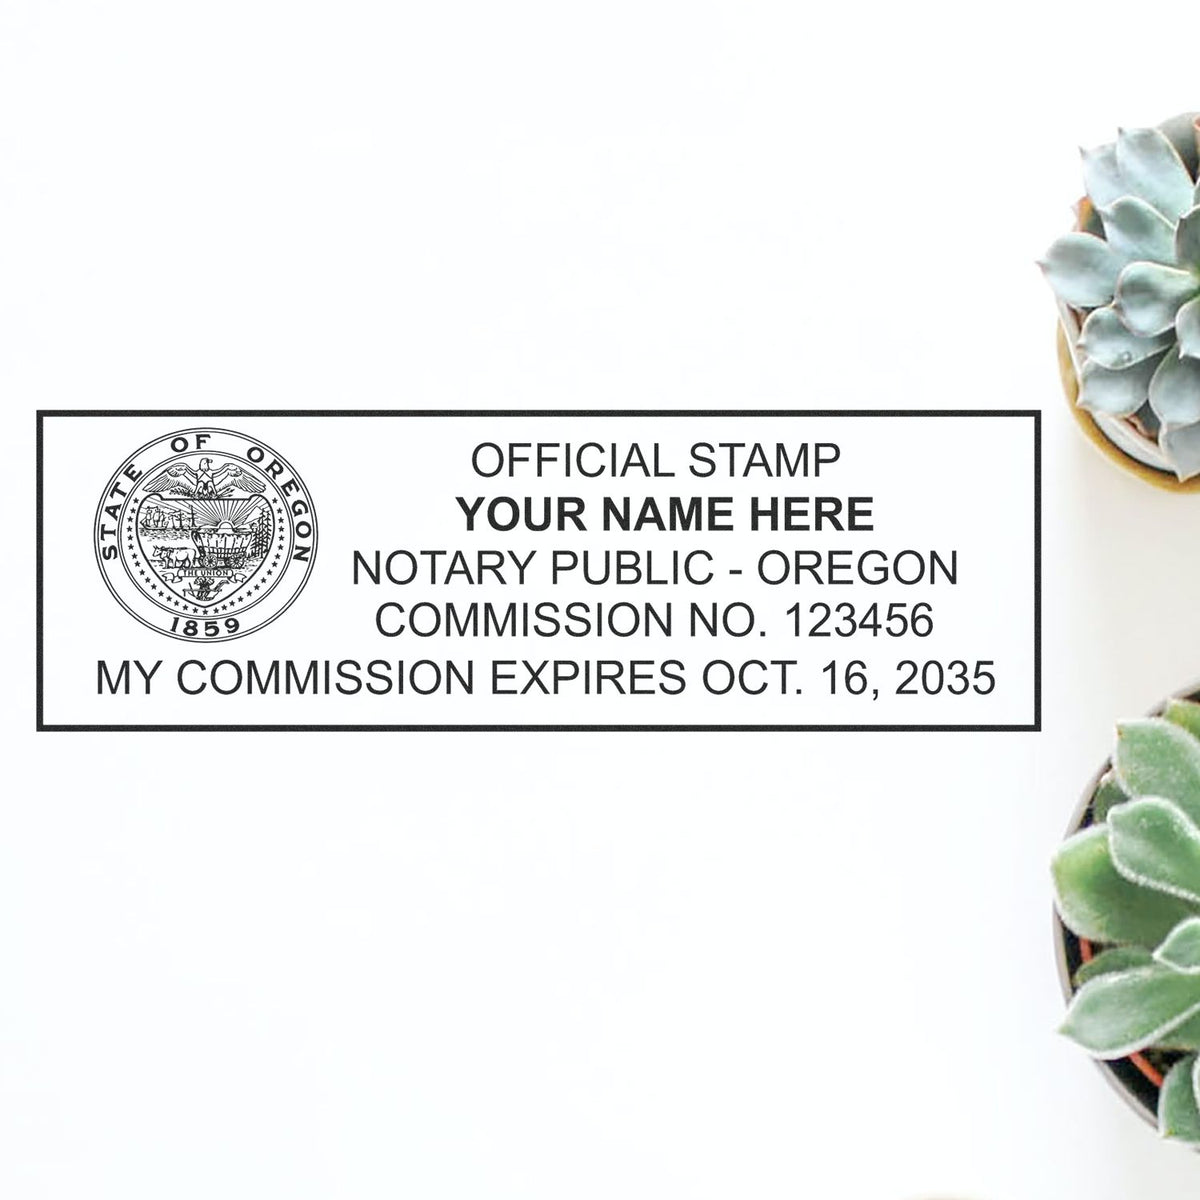 Another Example of a stamped impression of the Super Slim Oregon Notary Public Stamp on a piece of office paper.